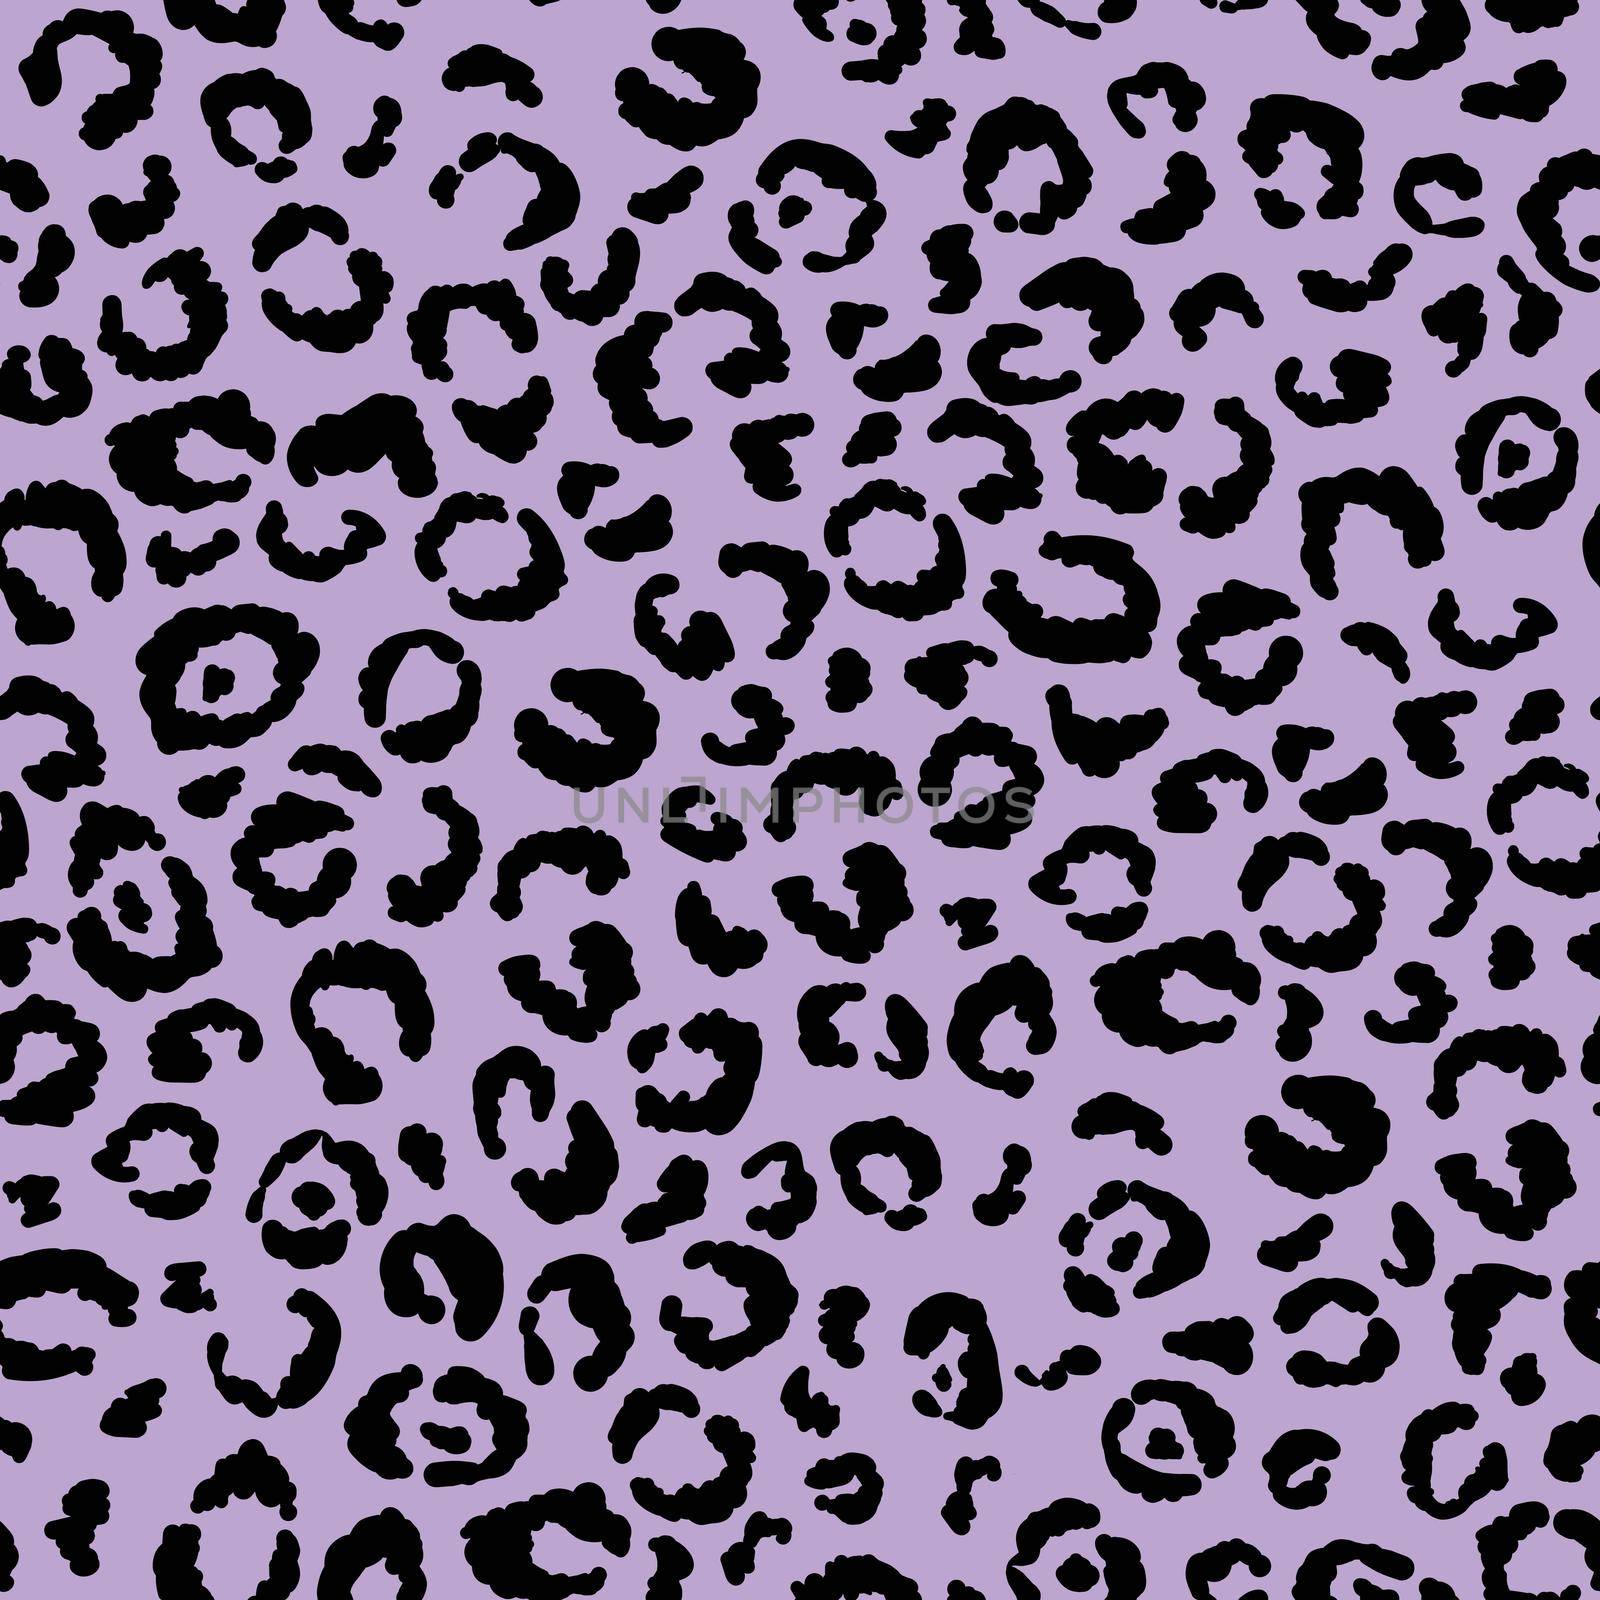 Abstract modern leopard seamless pattern. Animals trendy background. Purple and black decorative vector stock illustration for print, card, postcard, fabric, textile. Modern ornament of stylized skin by allaku